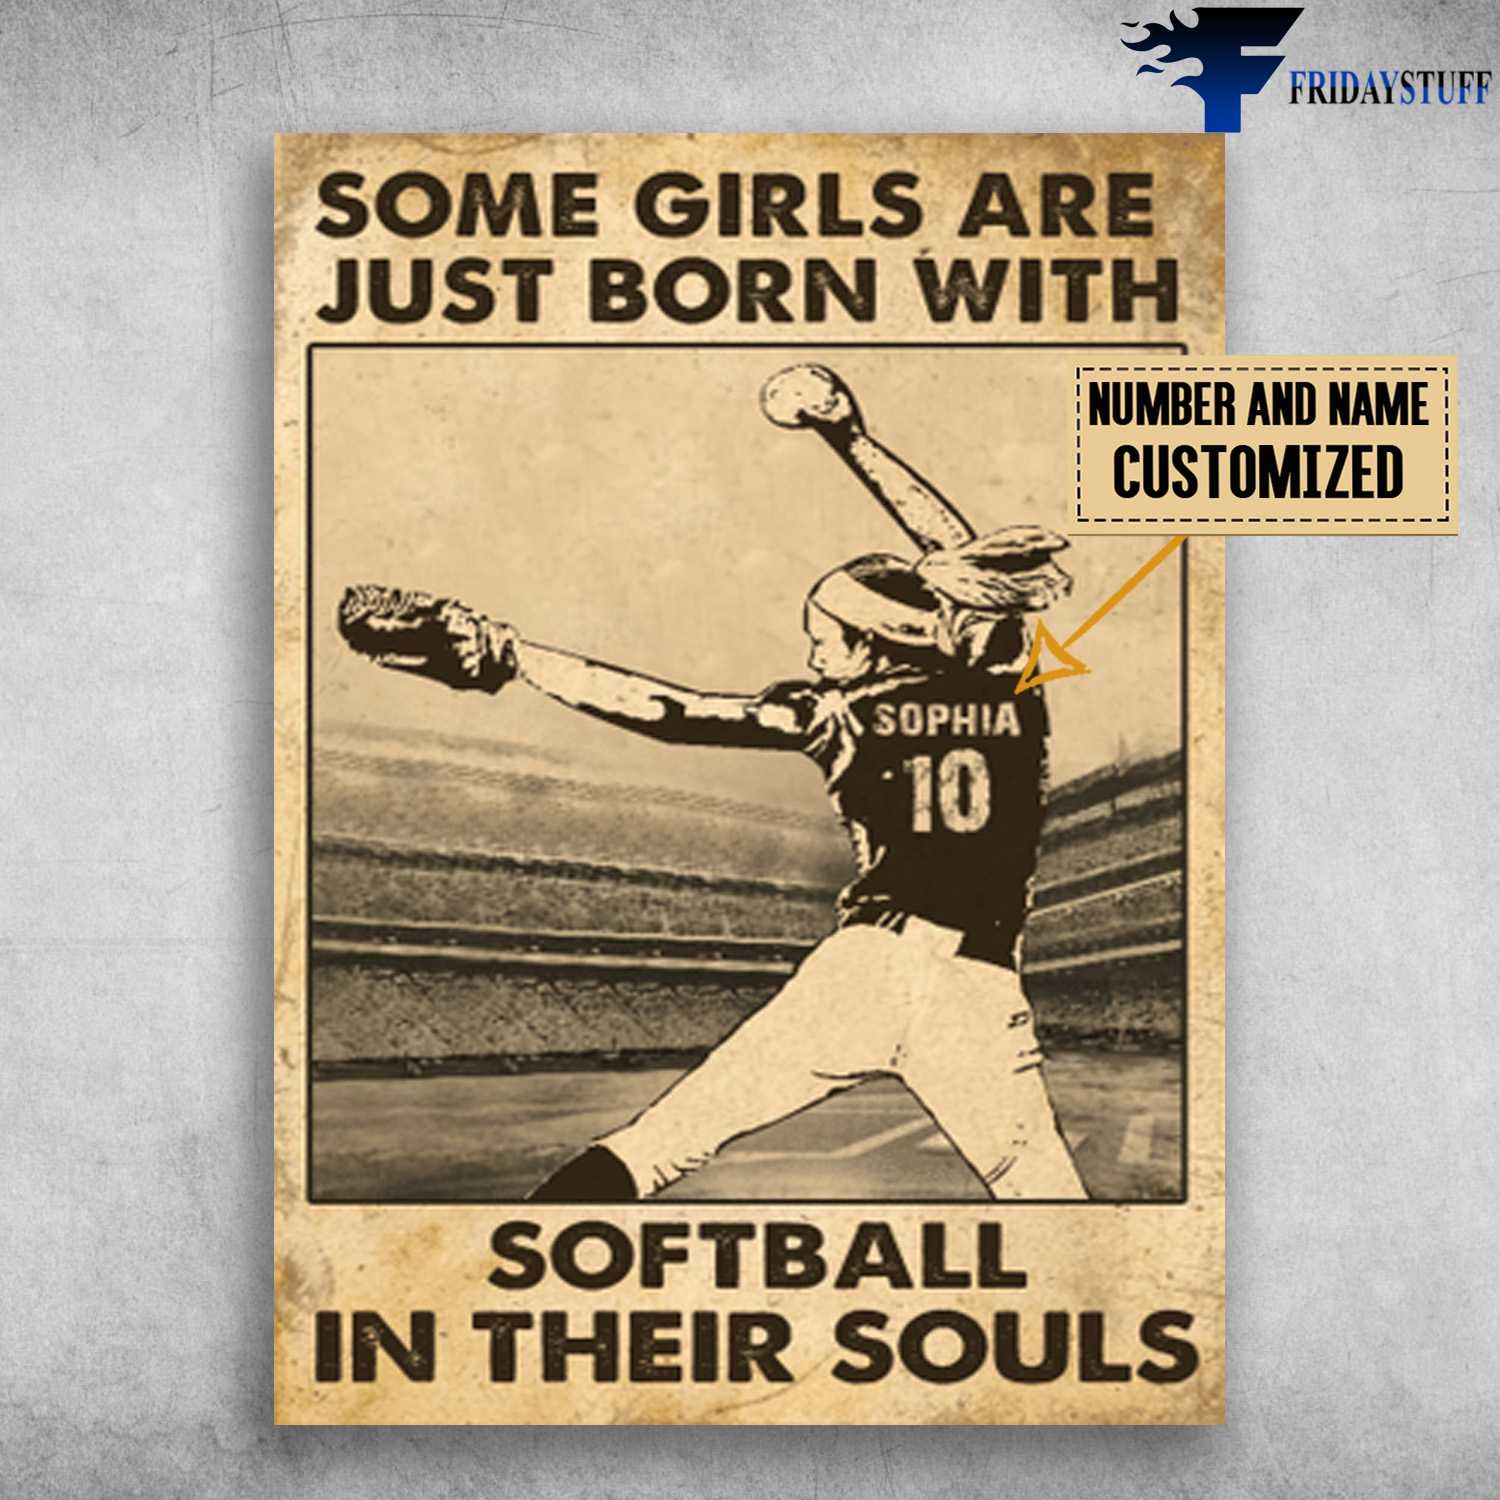 Softball Player, Girl Plays Softball, Some Girls Are Just Born With, Softball In Their Souls